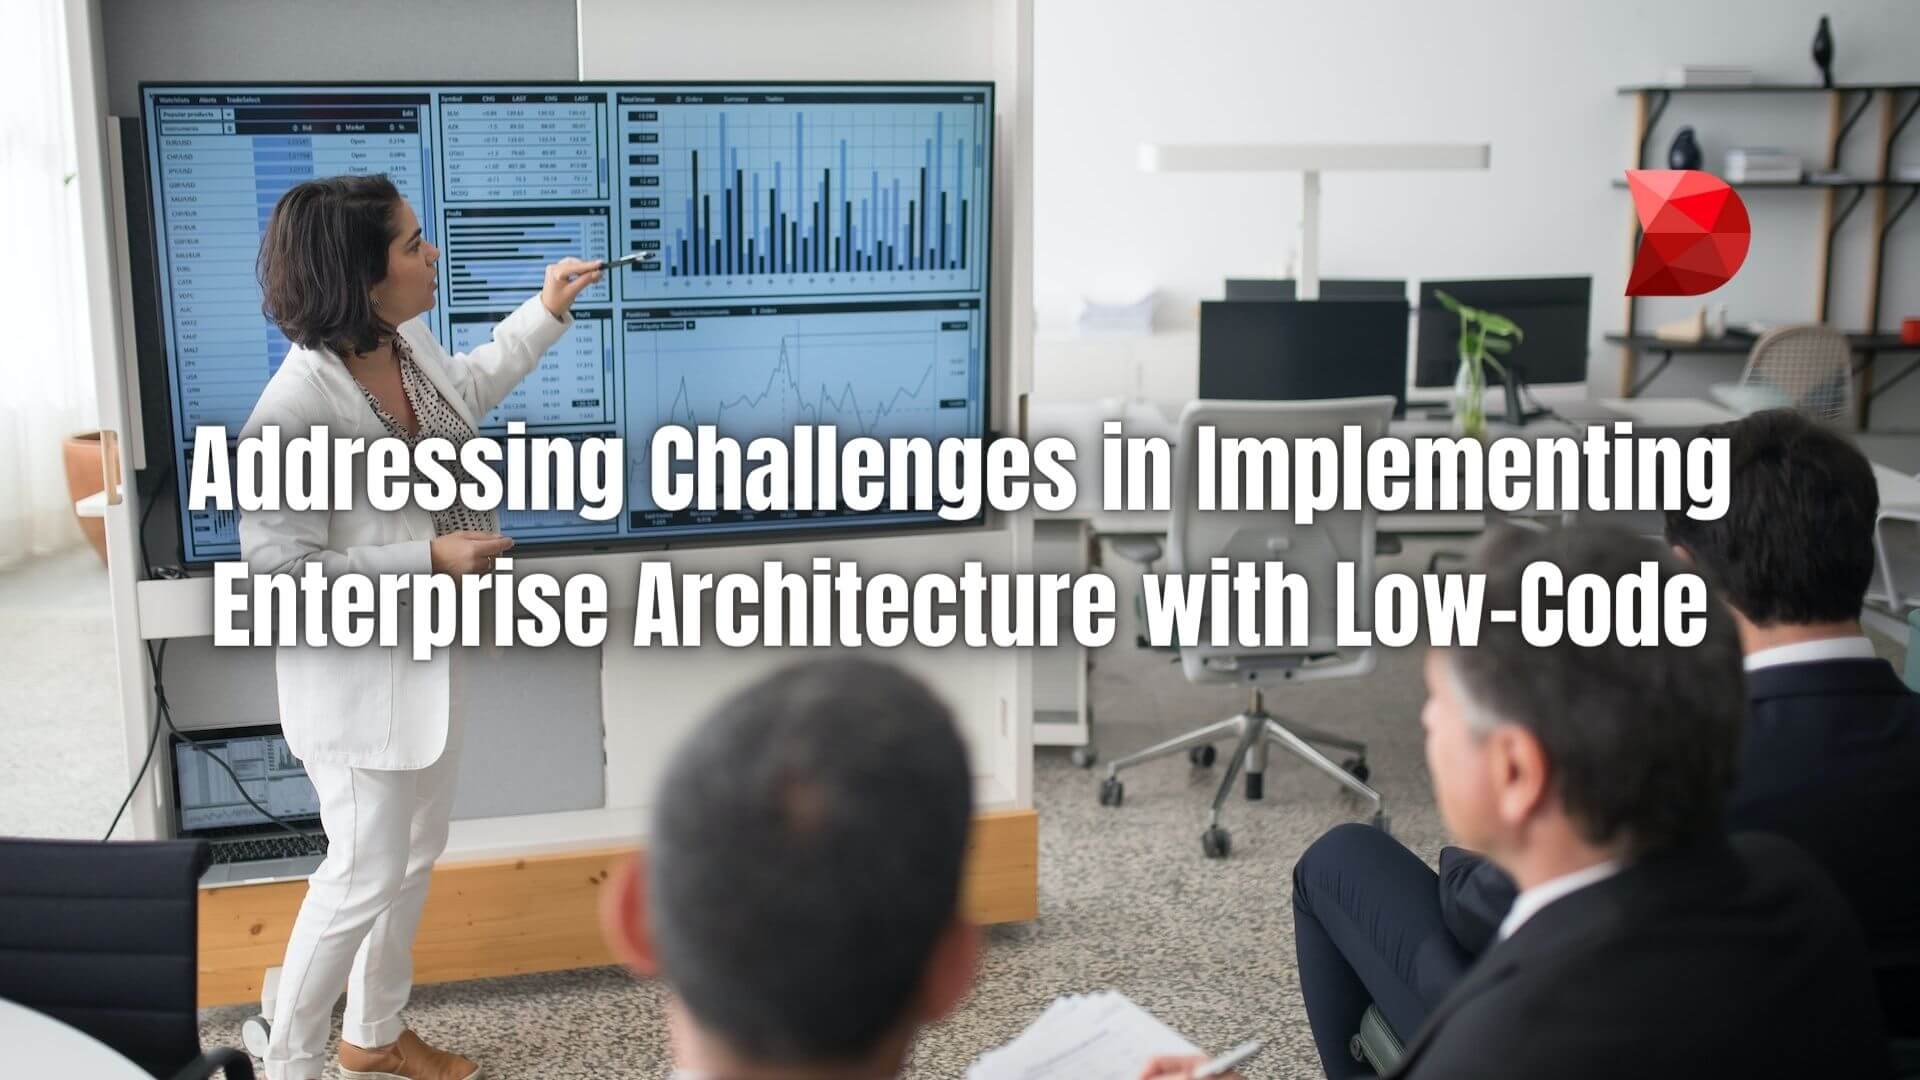 A correctly implemented enterprise architecture system can be very helpful to an organization. Here are the common implementation challenges.